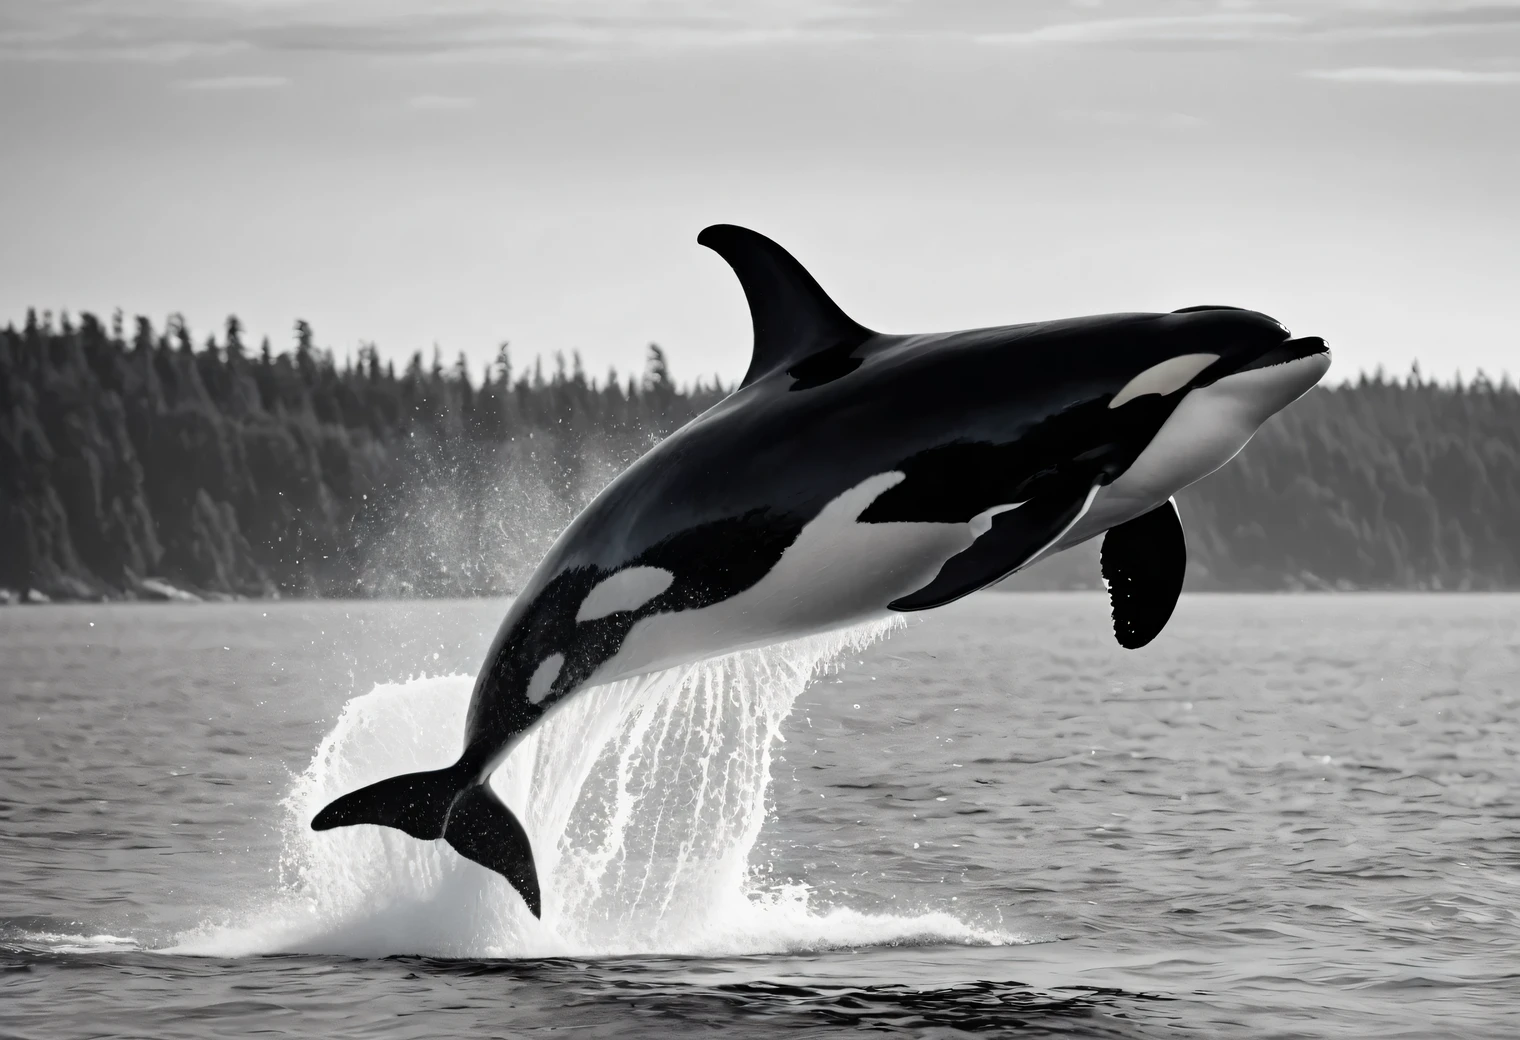 The ((black and white photo)) was taken with a Canon EOS 5D Mark IV camera with a Canon RF 24-70mm F2 lens.8L IS USM, the photo shows a large killer whale jumping out of the water, depth of field f/5, ISO 400, ((black and white colot pallete))